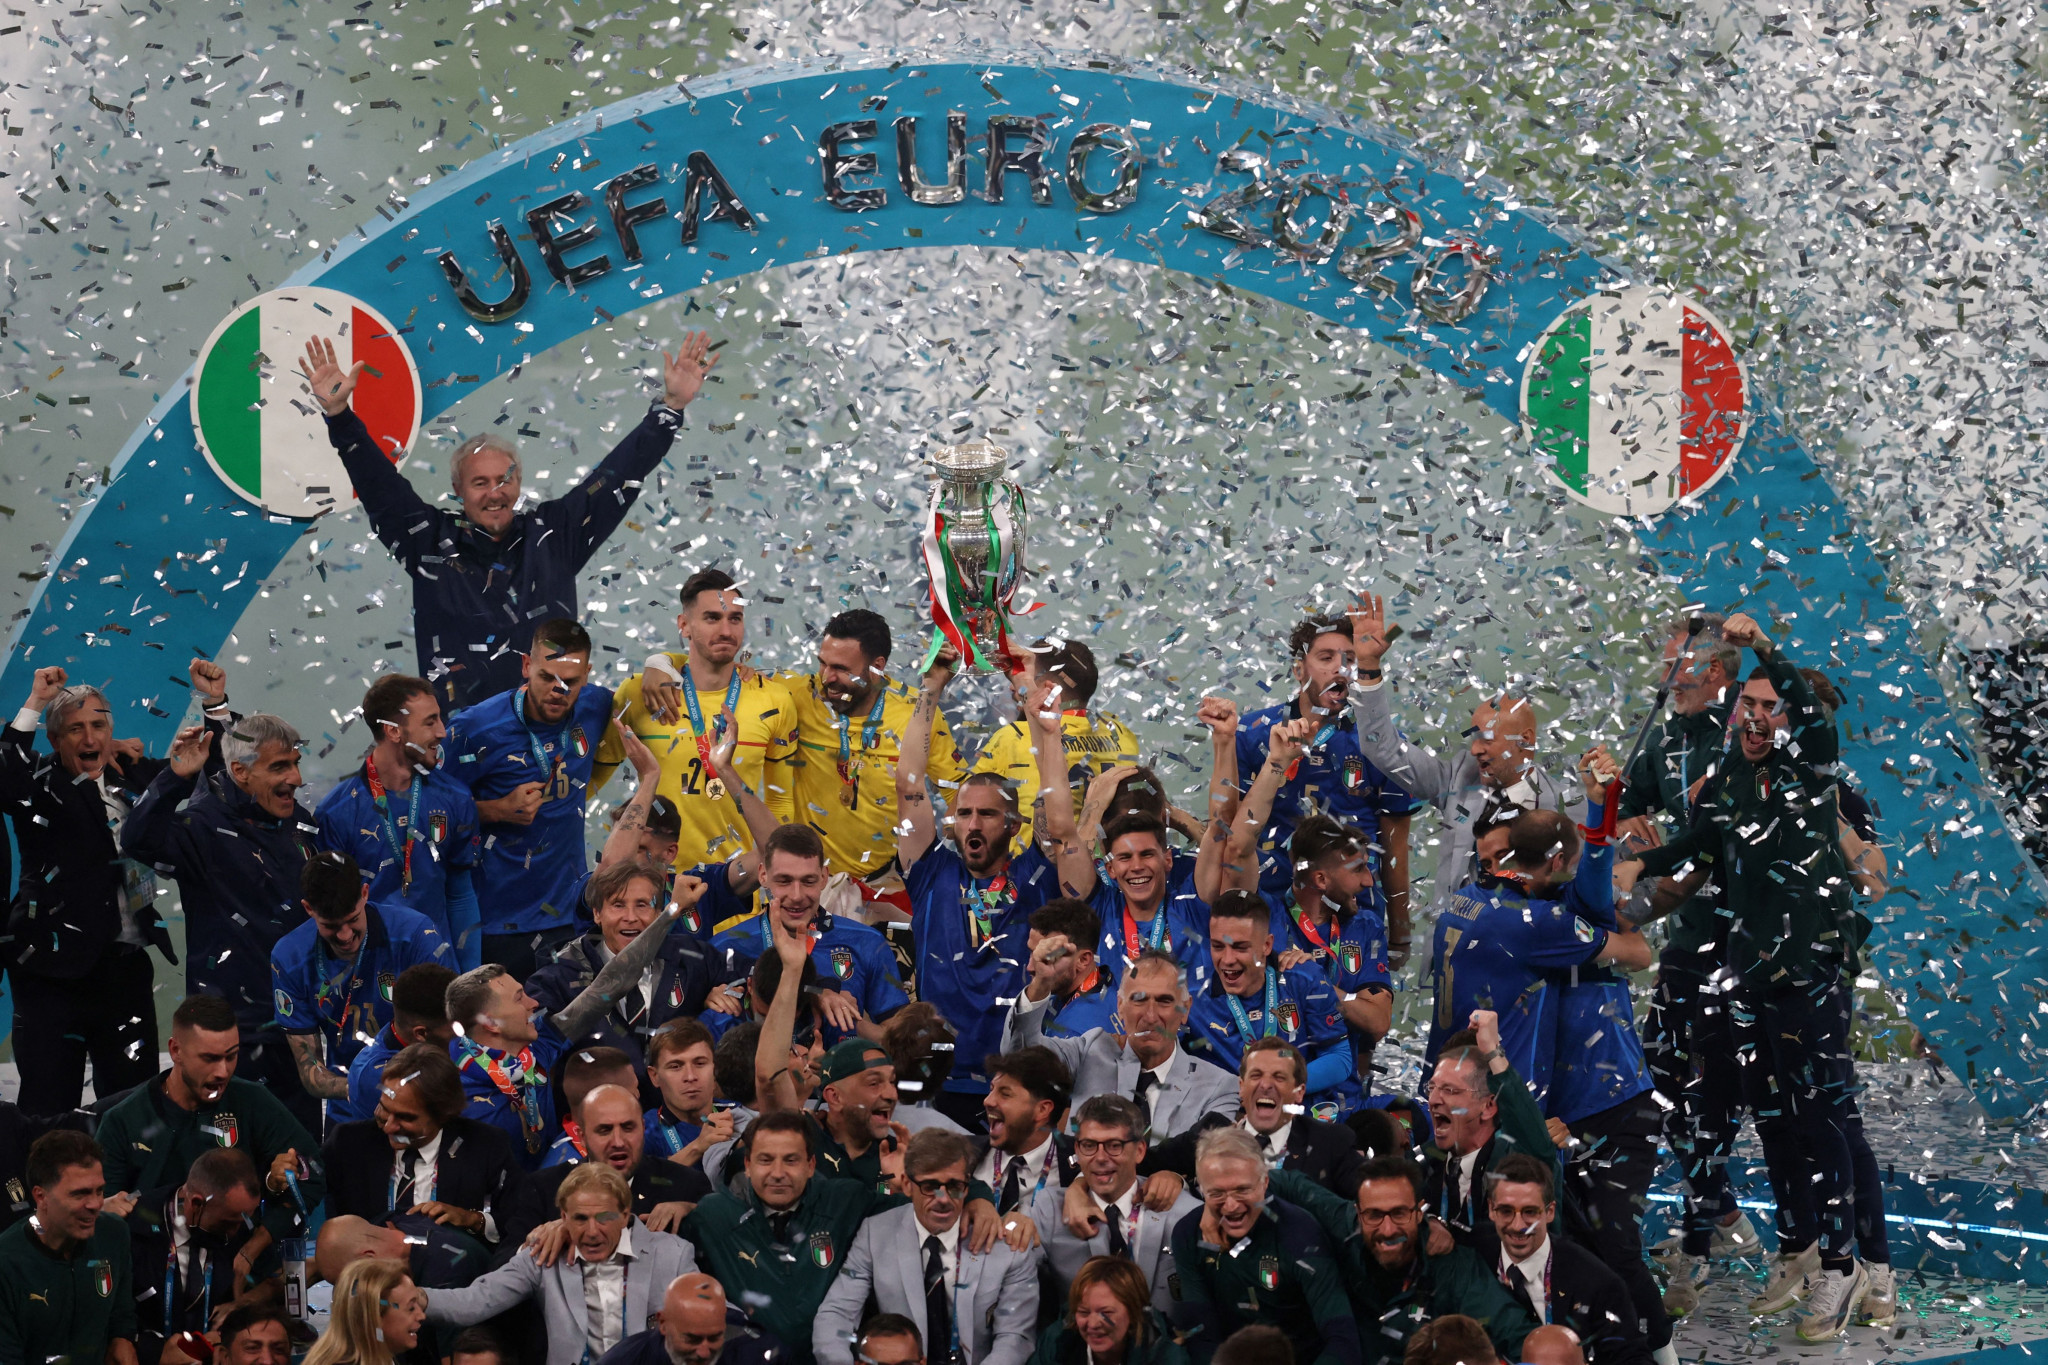 Italy beat England in the final to lift the UEFA Euro 2020 trophy at the Wembley Stadium in England last year ©Getty Images 